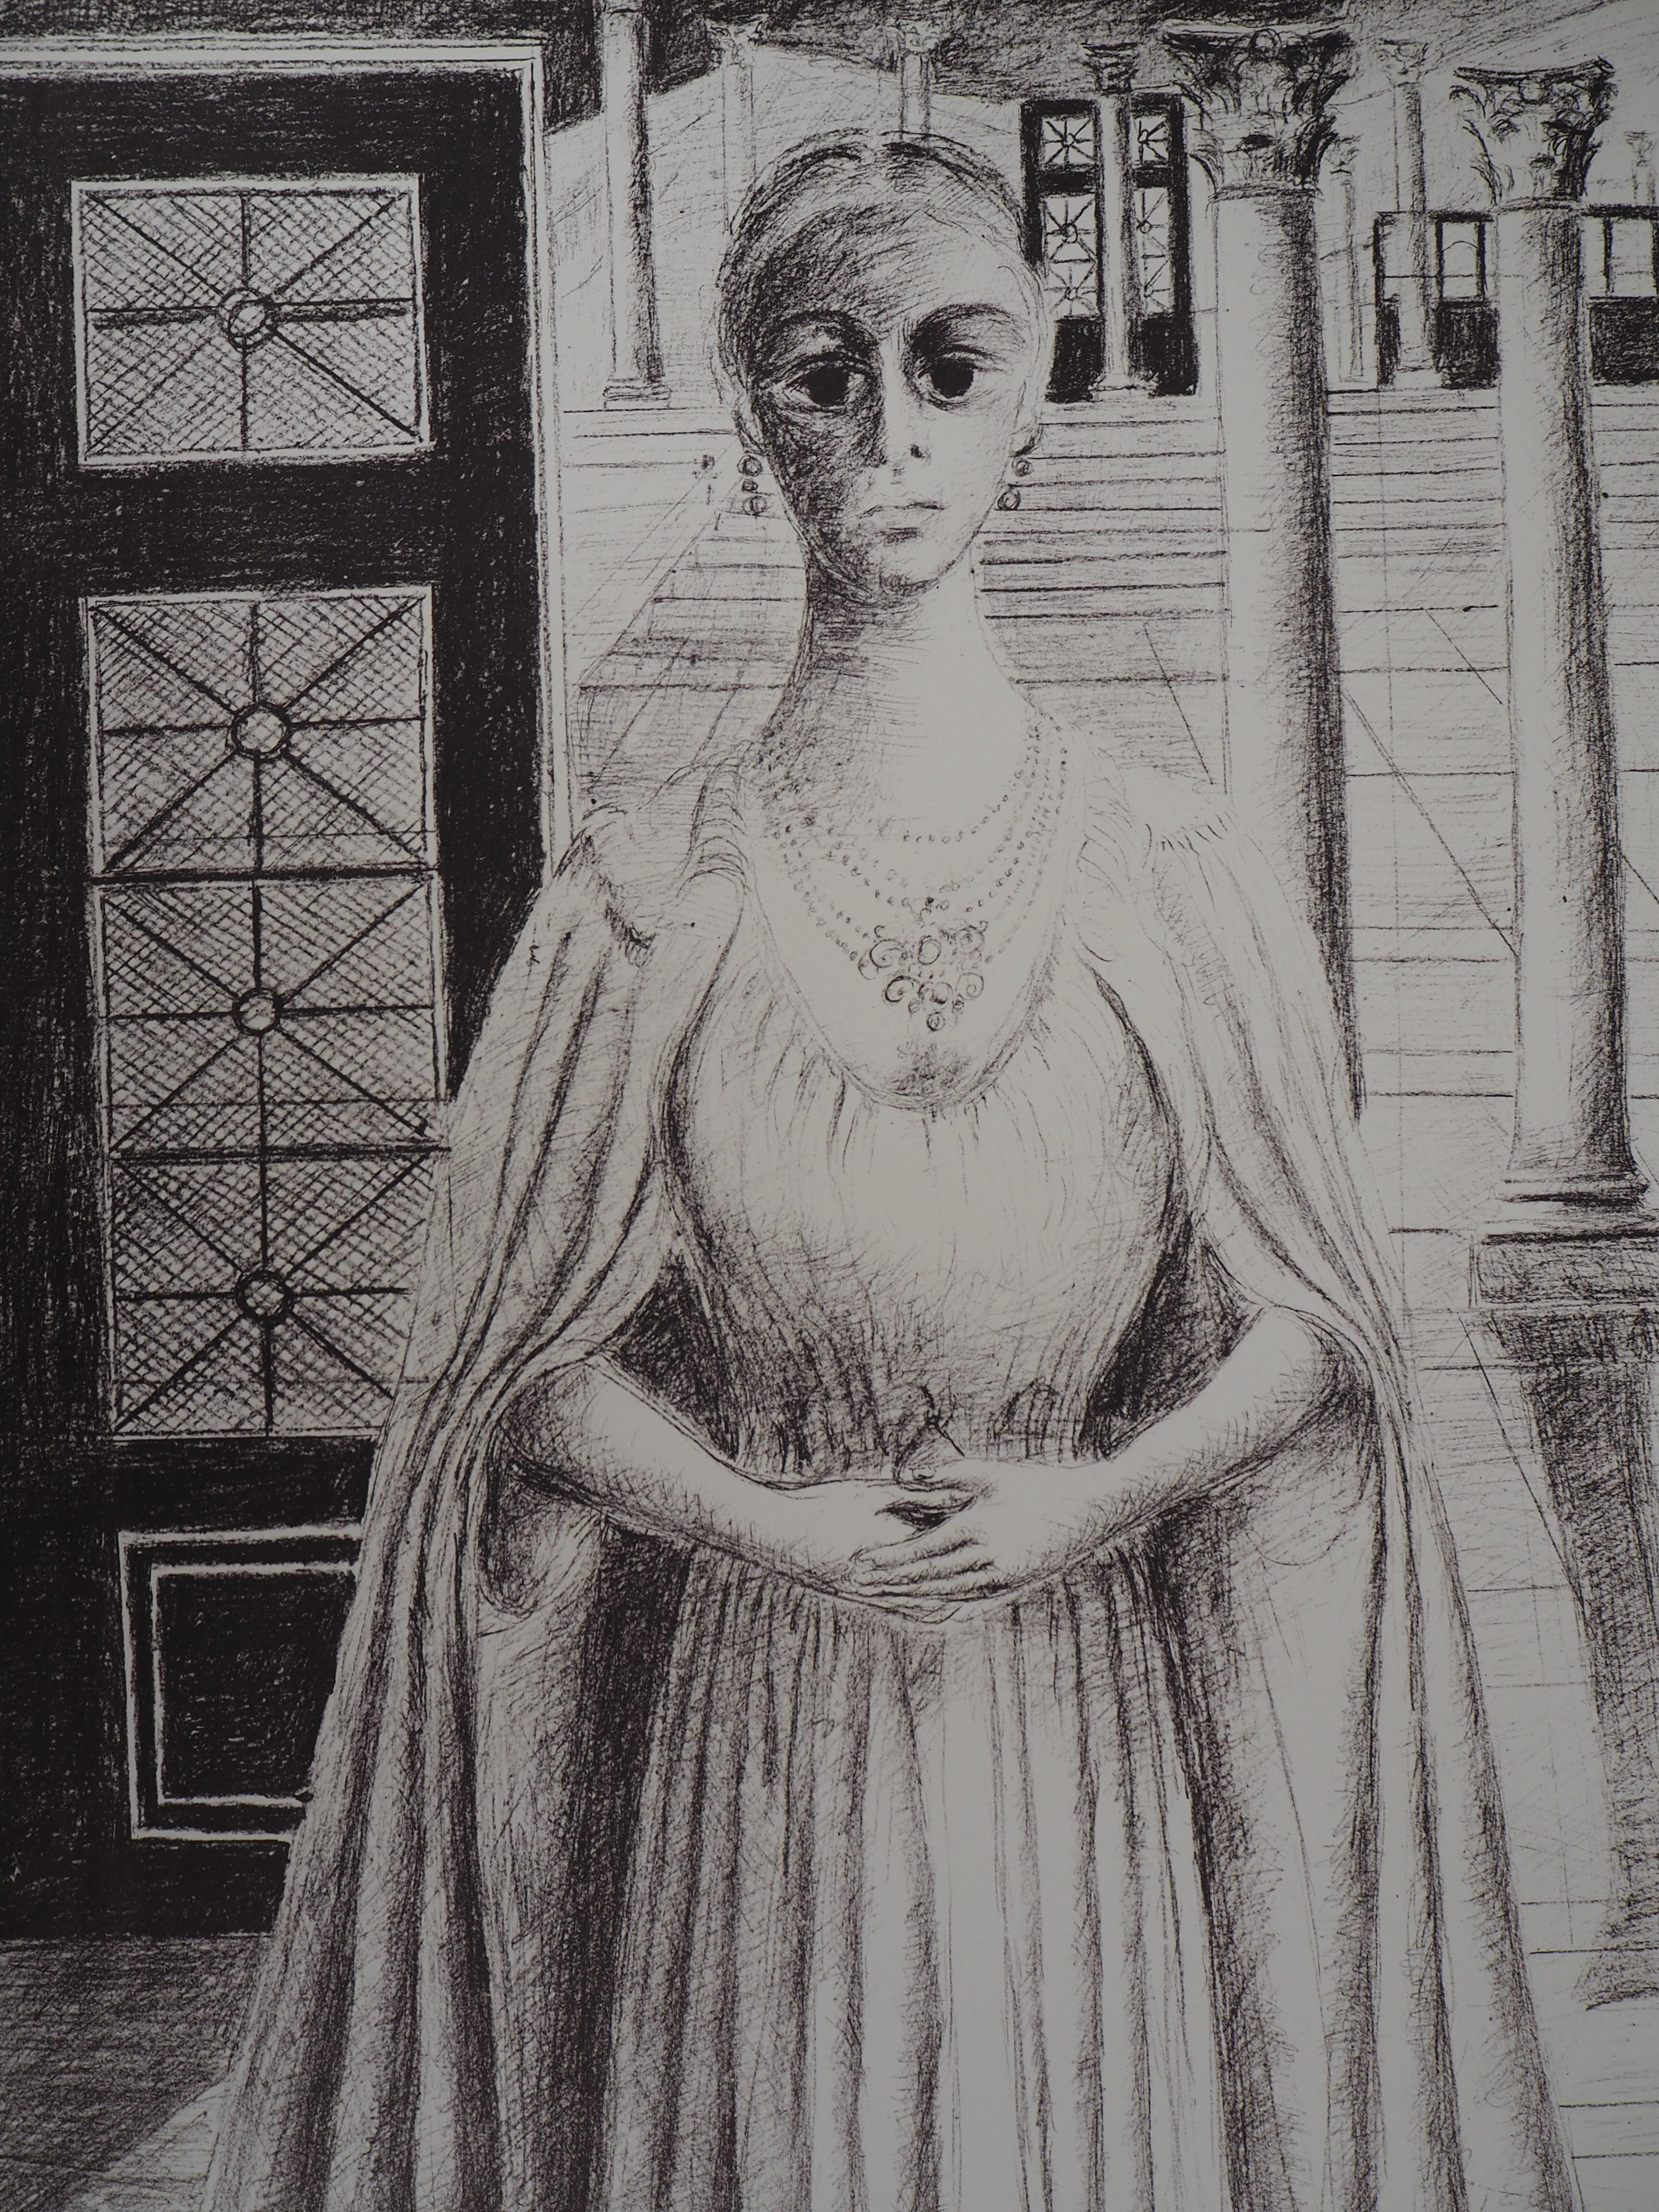 The Empress - Original signed lithograph - 1974 - Modern Print by Paul Delvaux